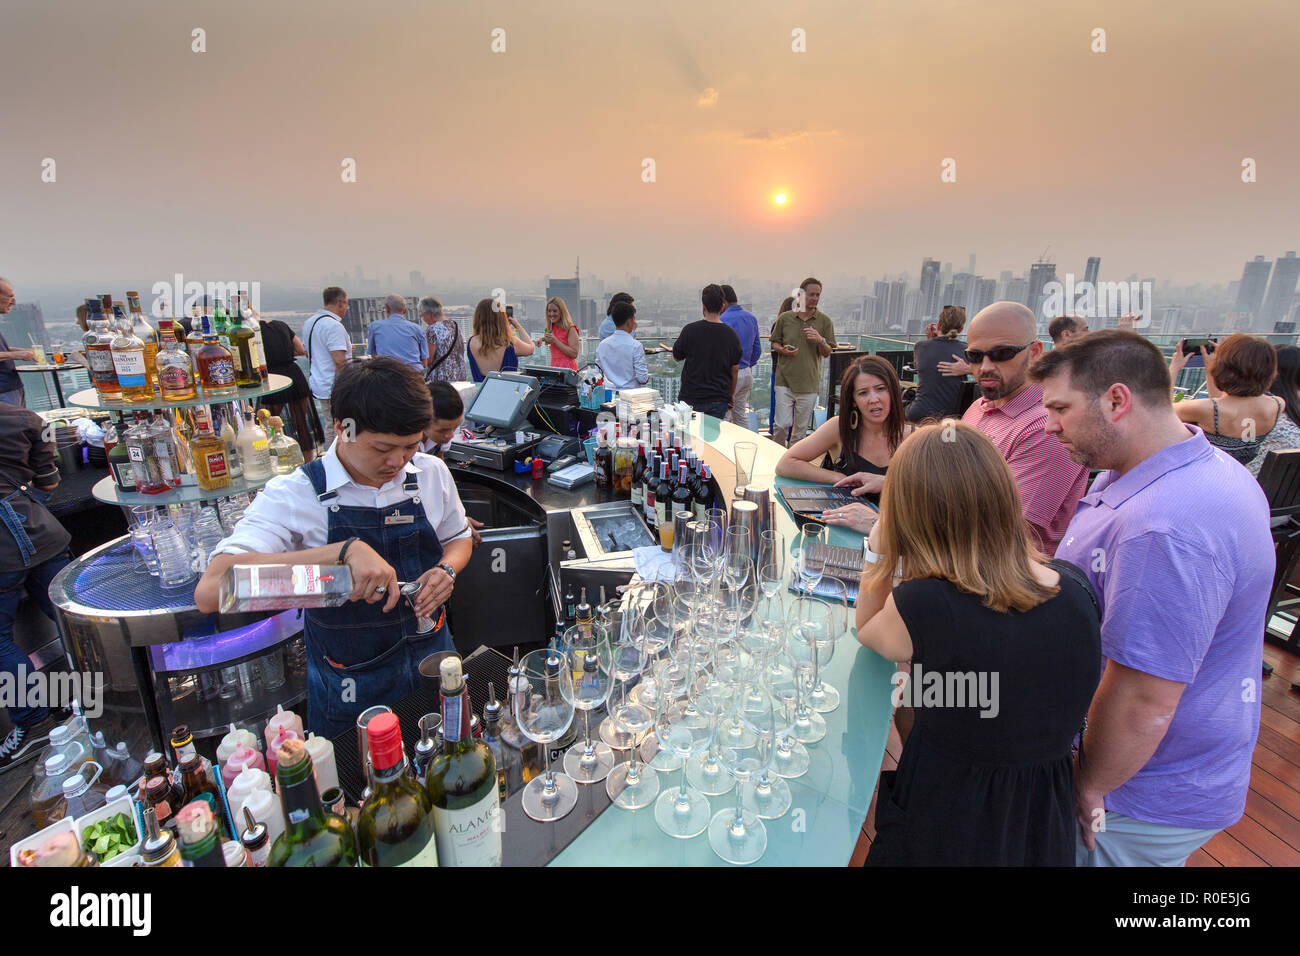 BANGKOK, THAILAND - FEBRUARY 10, 2017 : People drinking and enjoying the sunset at the Octave rooftop bar of the Marriott tower hotel in the Thong Lor Stock Photo